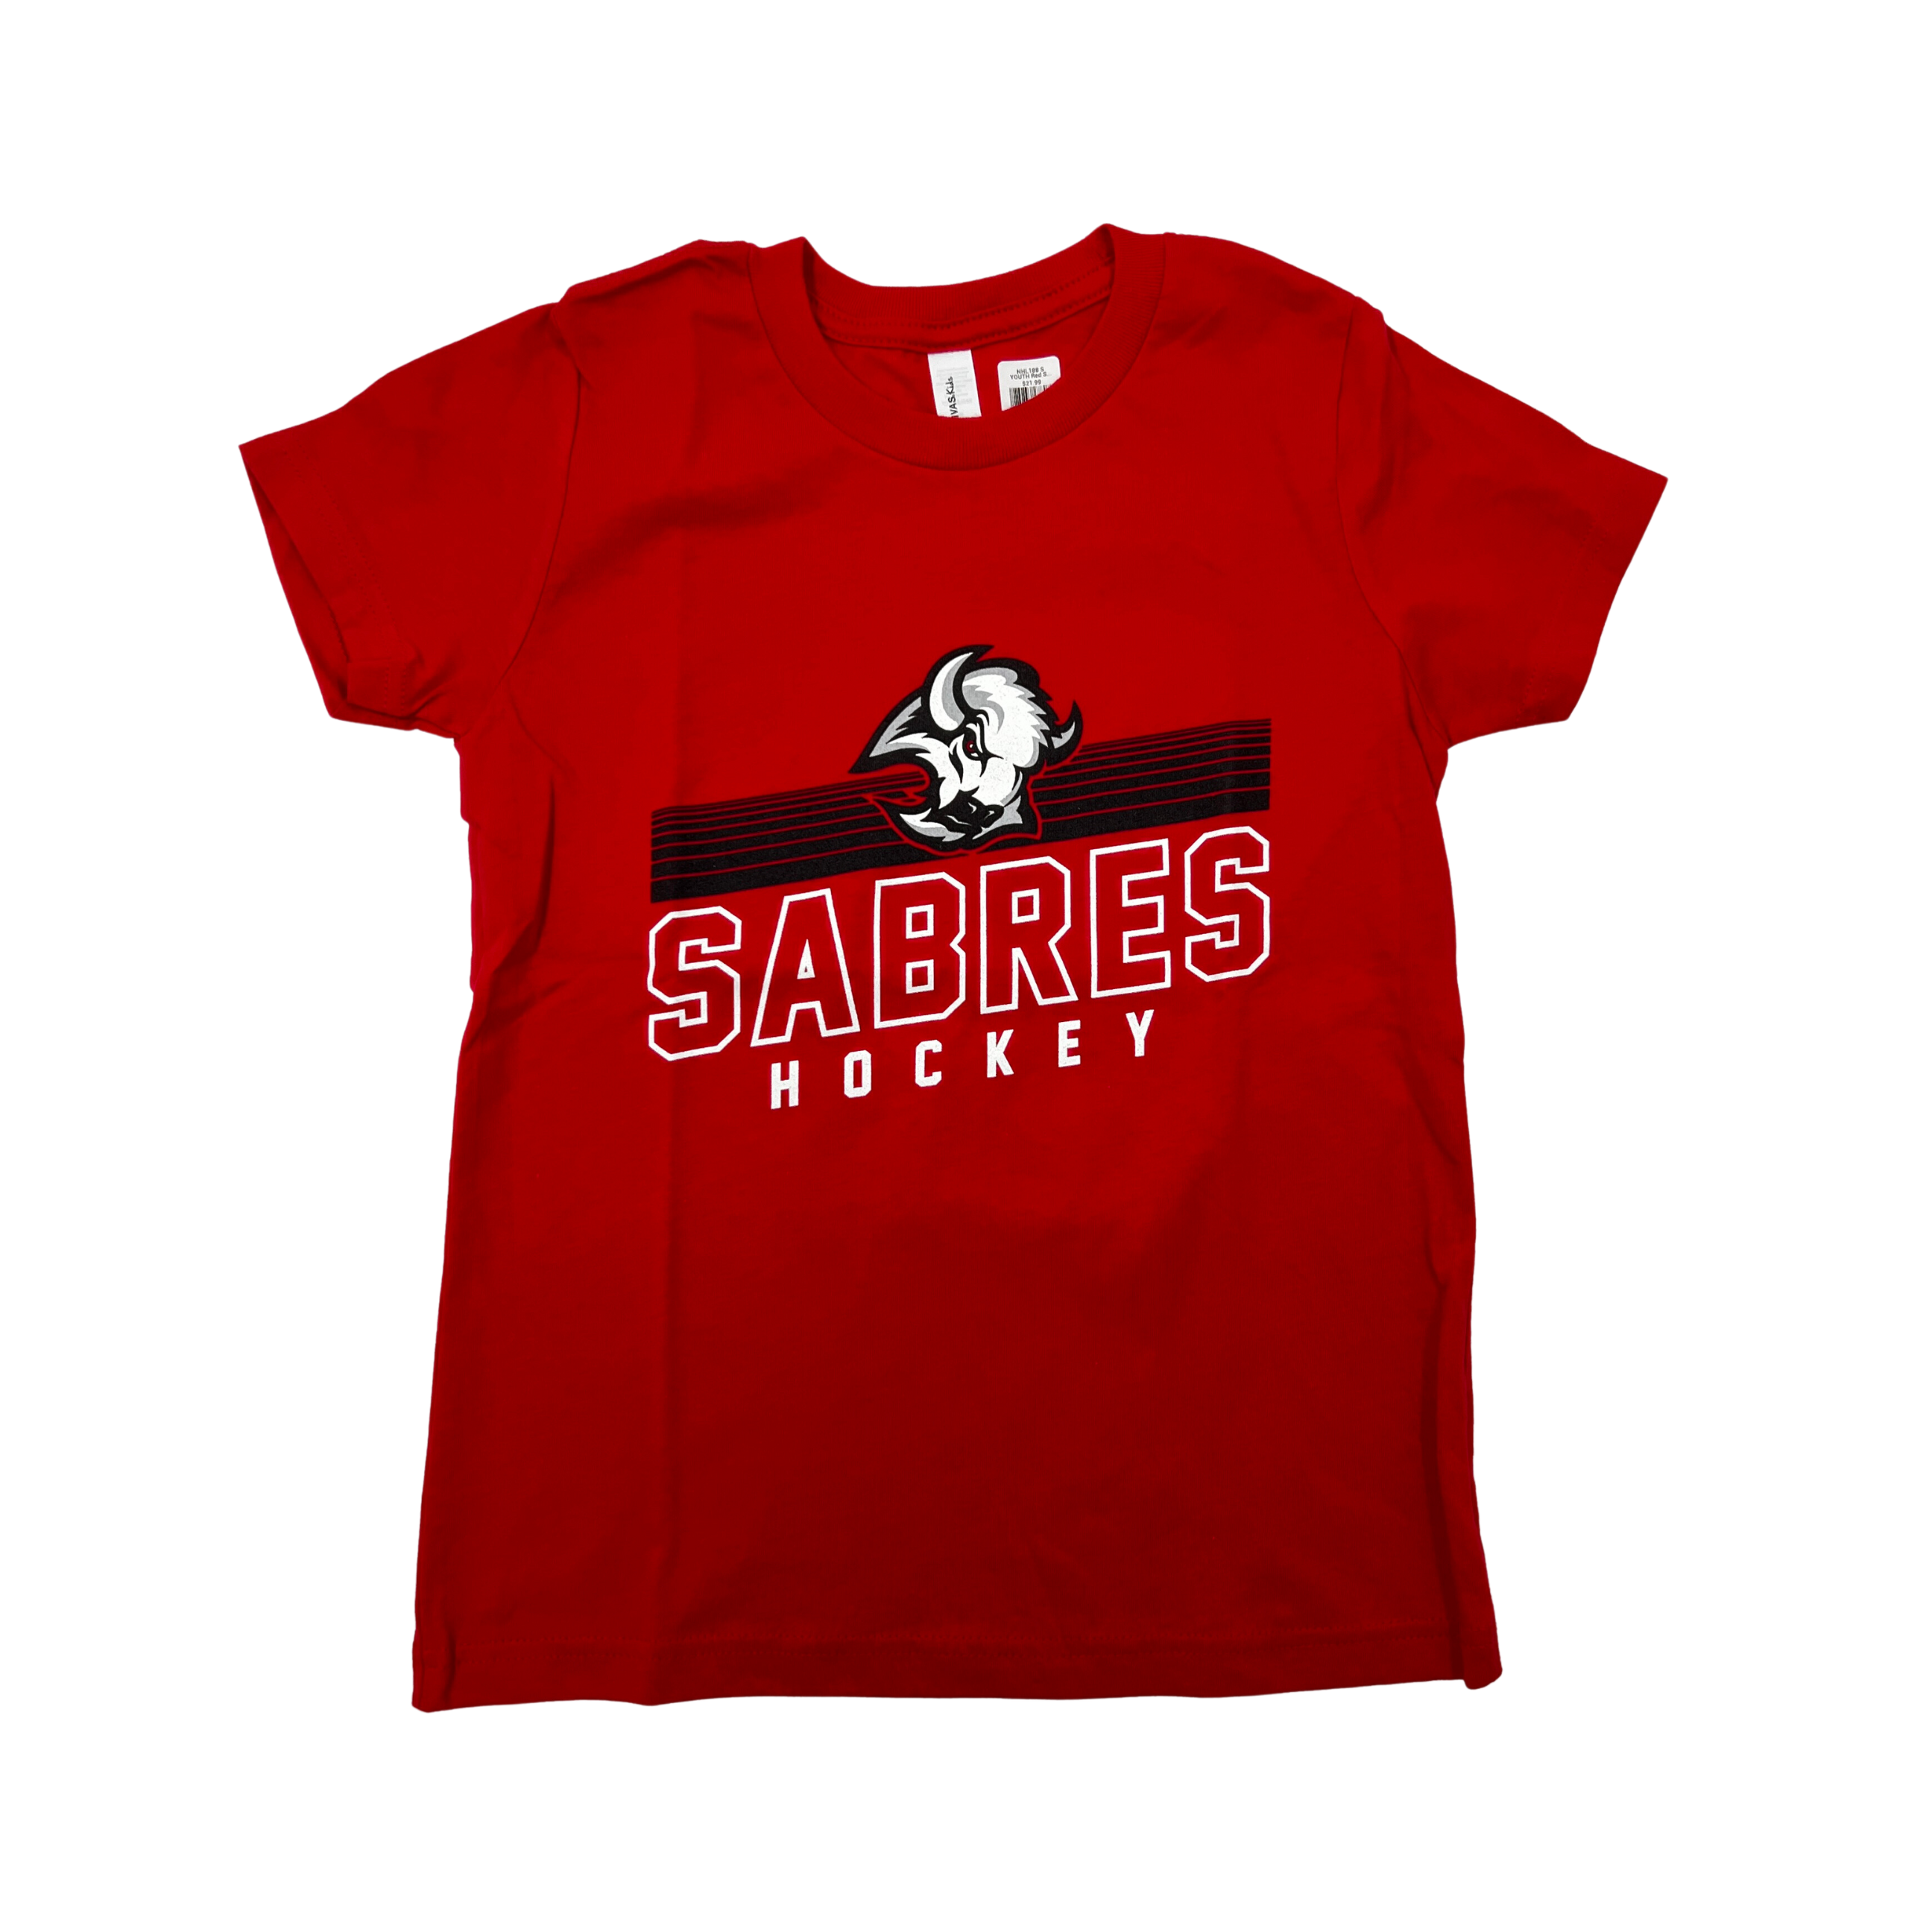 SABRES YOUTH JERSEY-S/M - household items - by owner - housewares